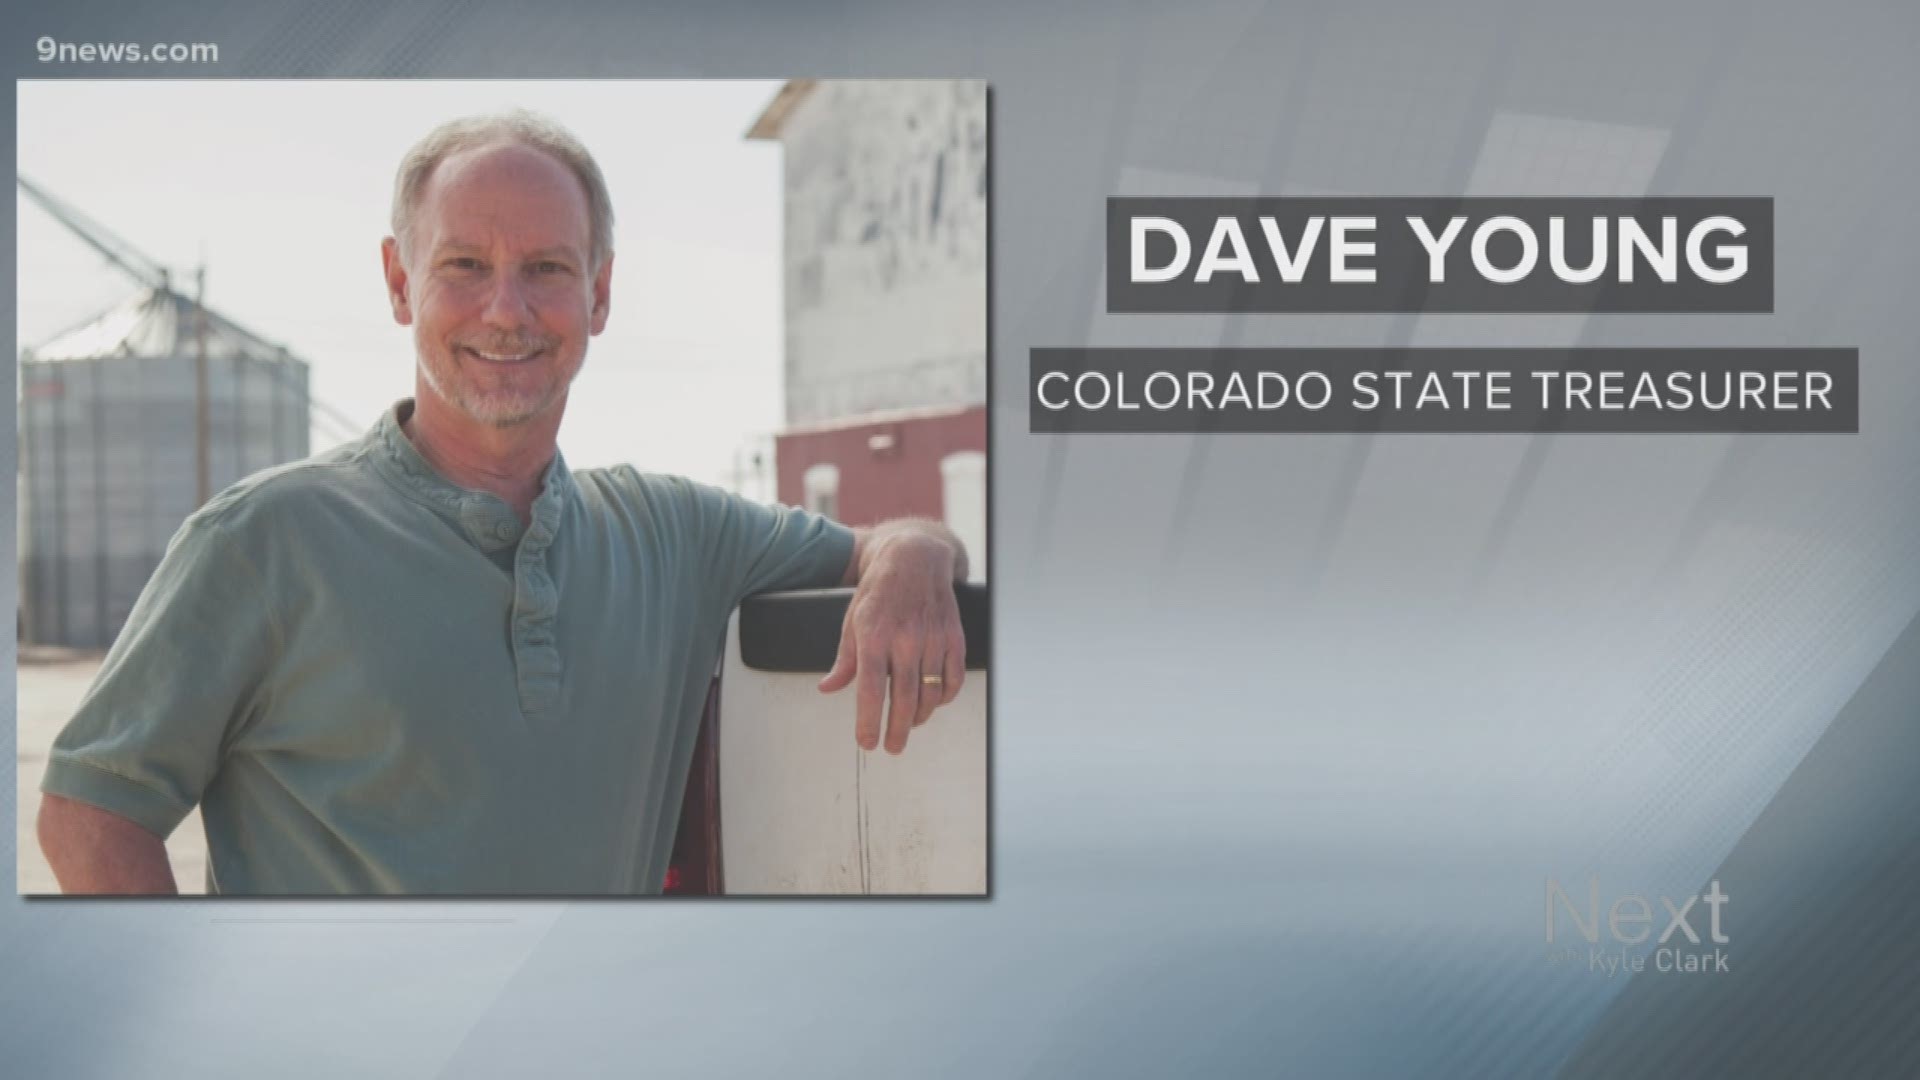 Colorado's treasurer, Dave Young, says the Great Colorado Payback program is not as much of a mess as a new audit makes it seem.